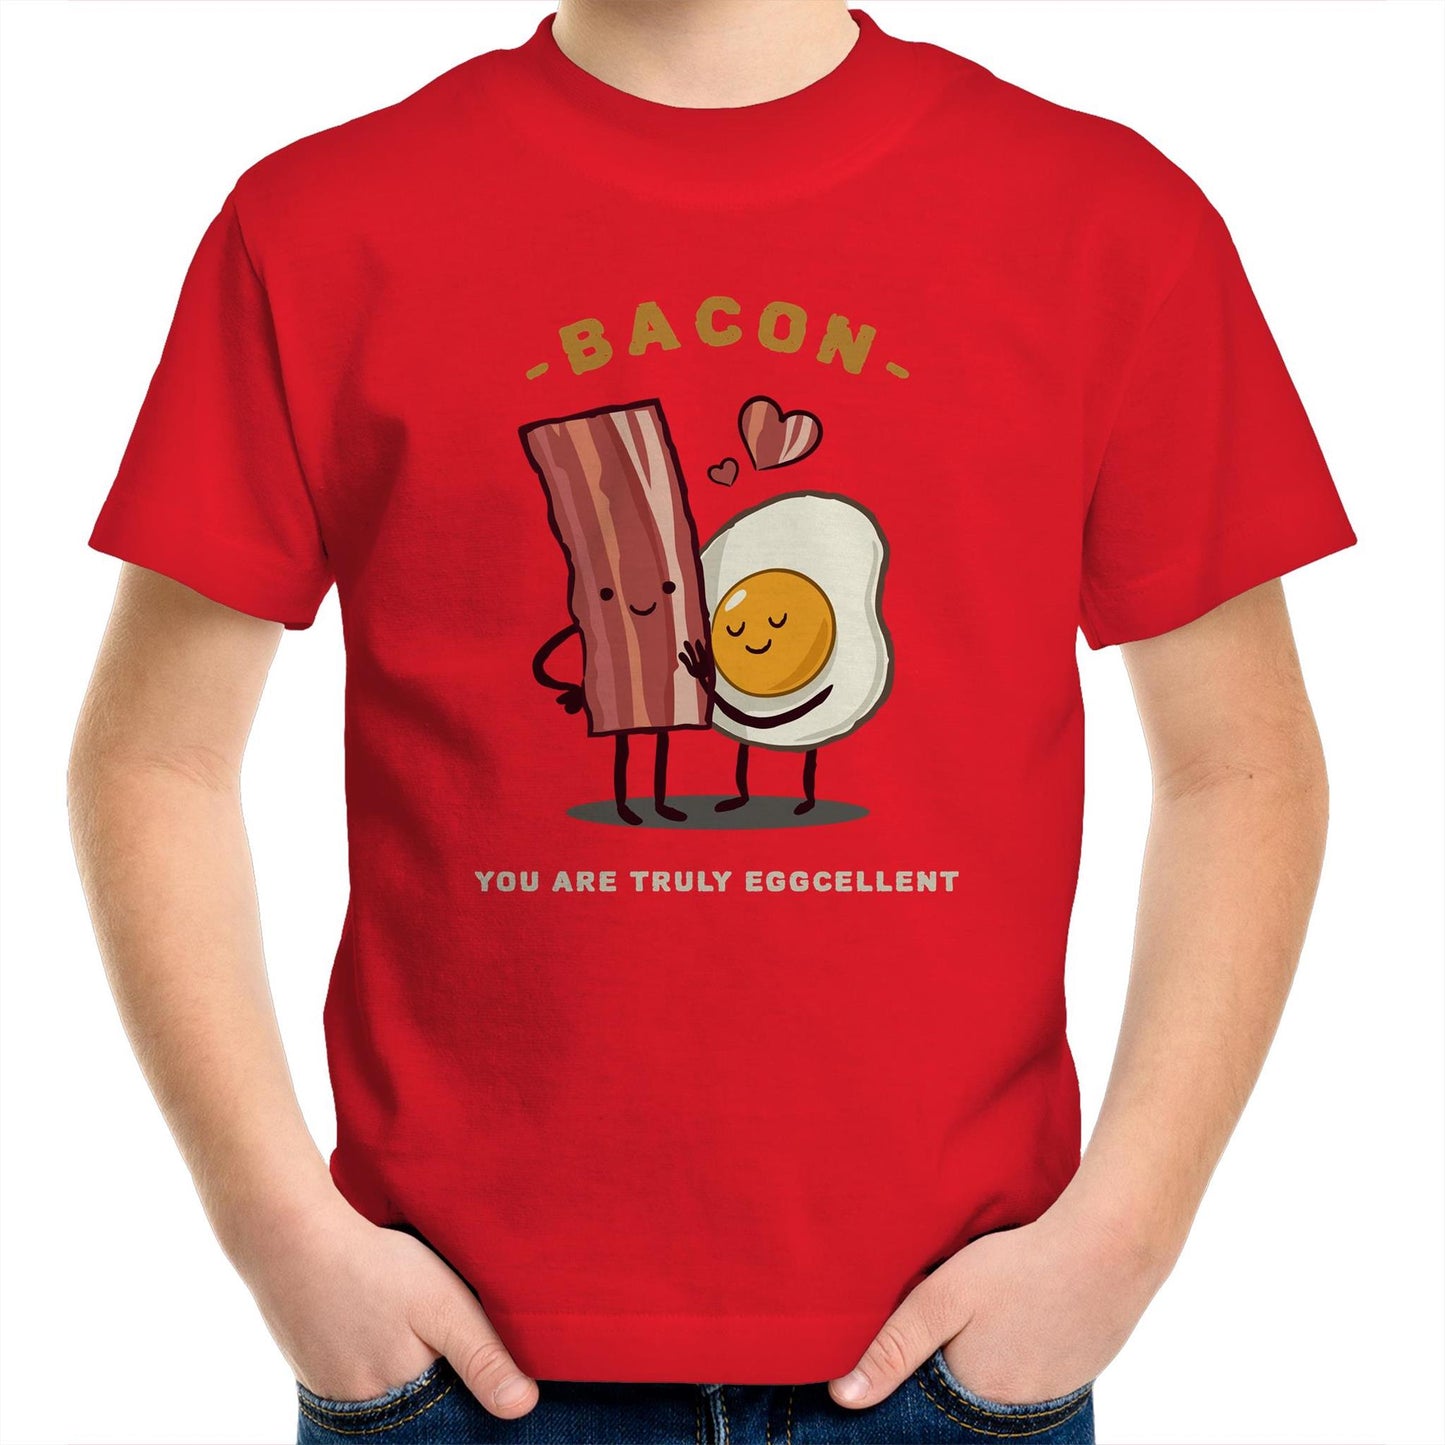 Bacon, You Are Truly Eggcellent - Kids Youth T-Shirt Red Kids Youth T-shirt Food